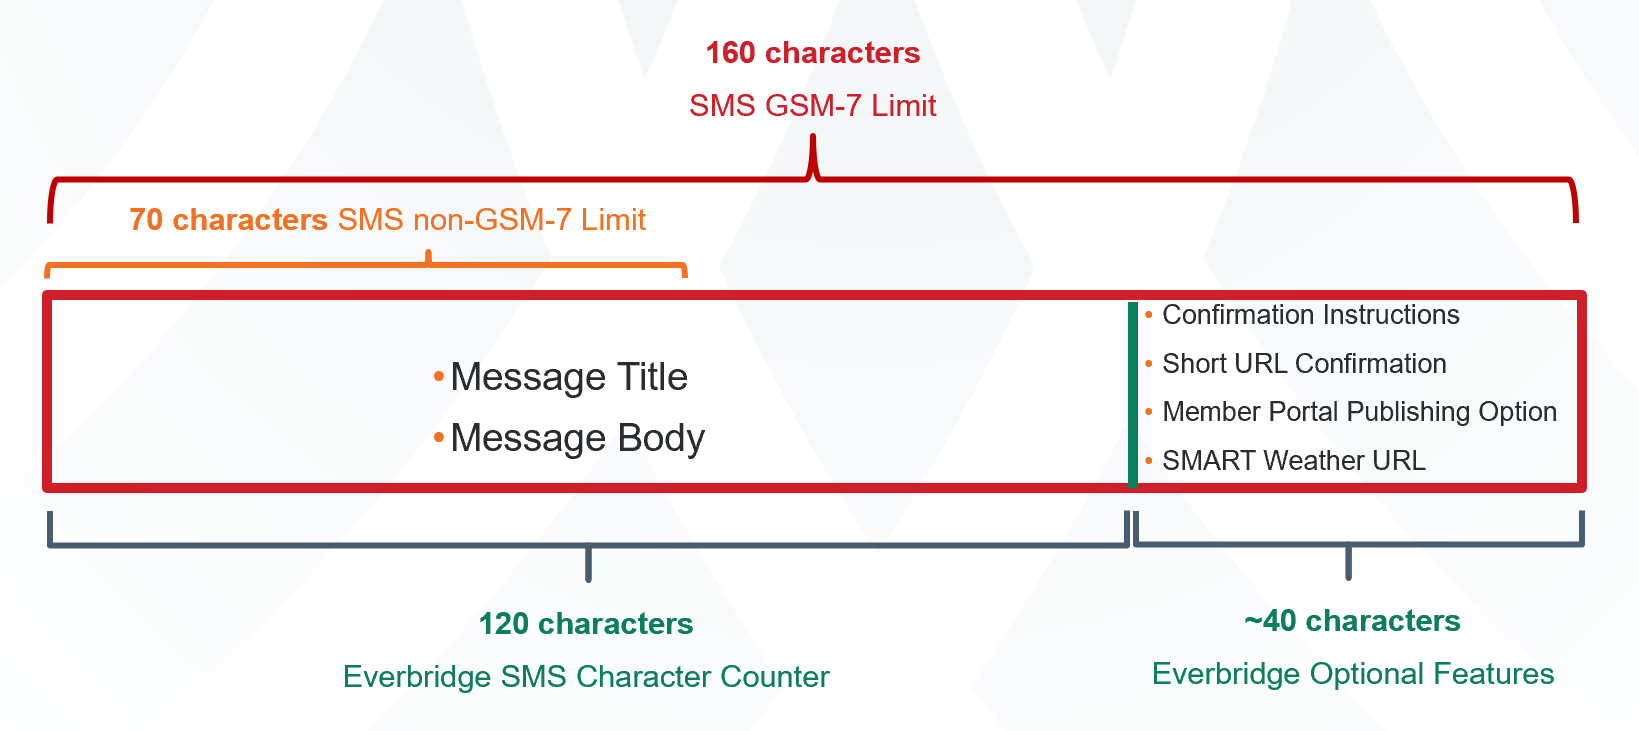 Roughly how many SMS characters will remain when multiple optional features are used